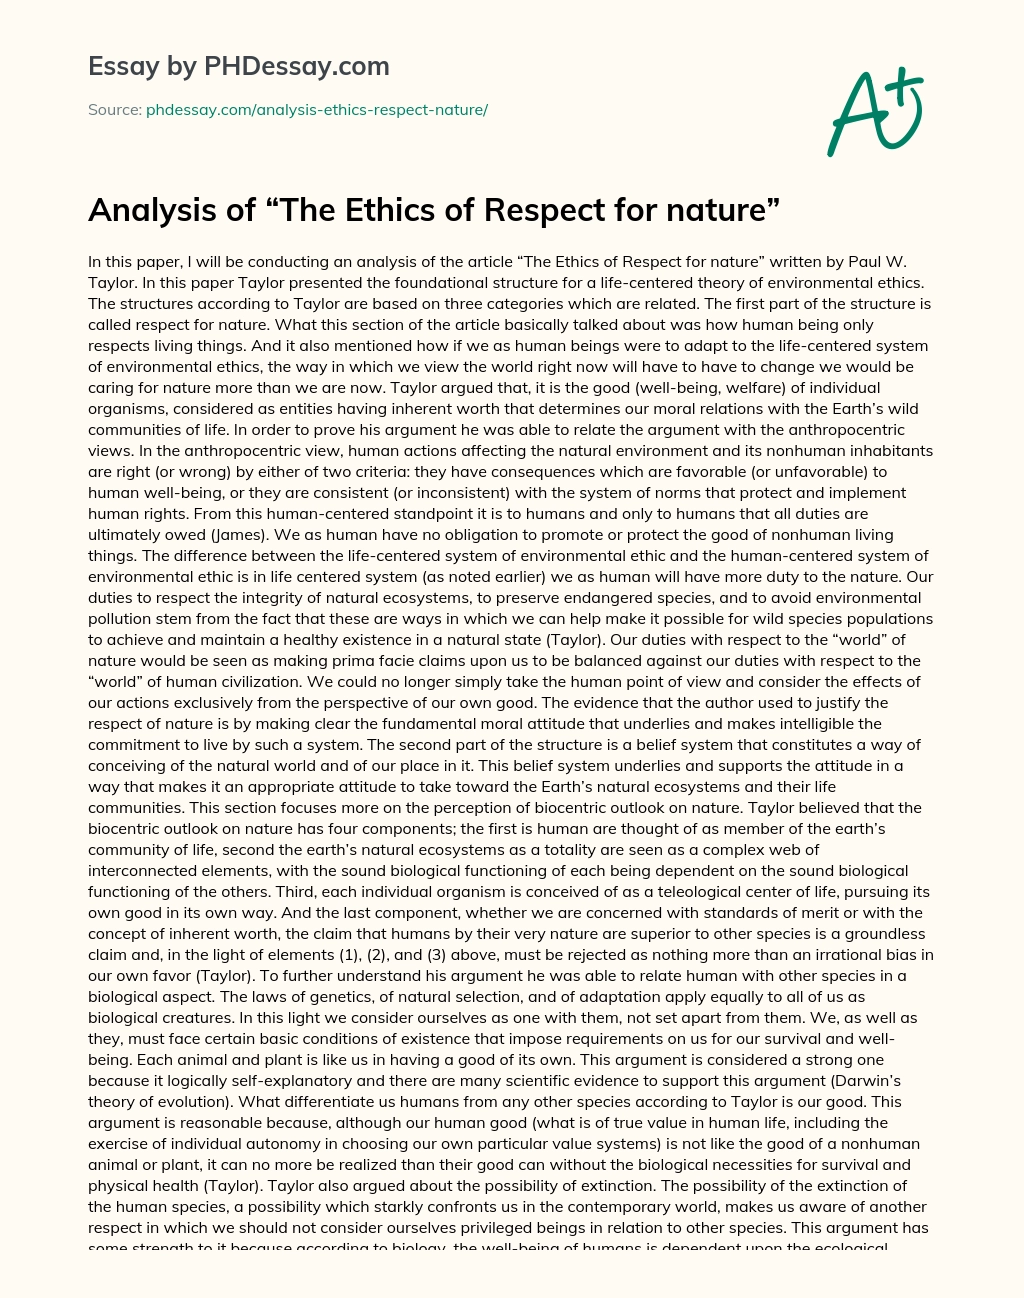 Analysis of “The Ethics of Respect for nature” essay